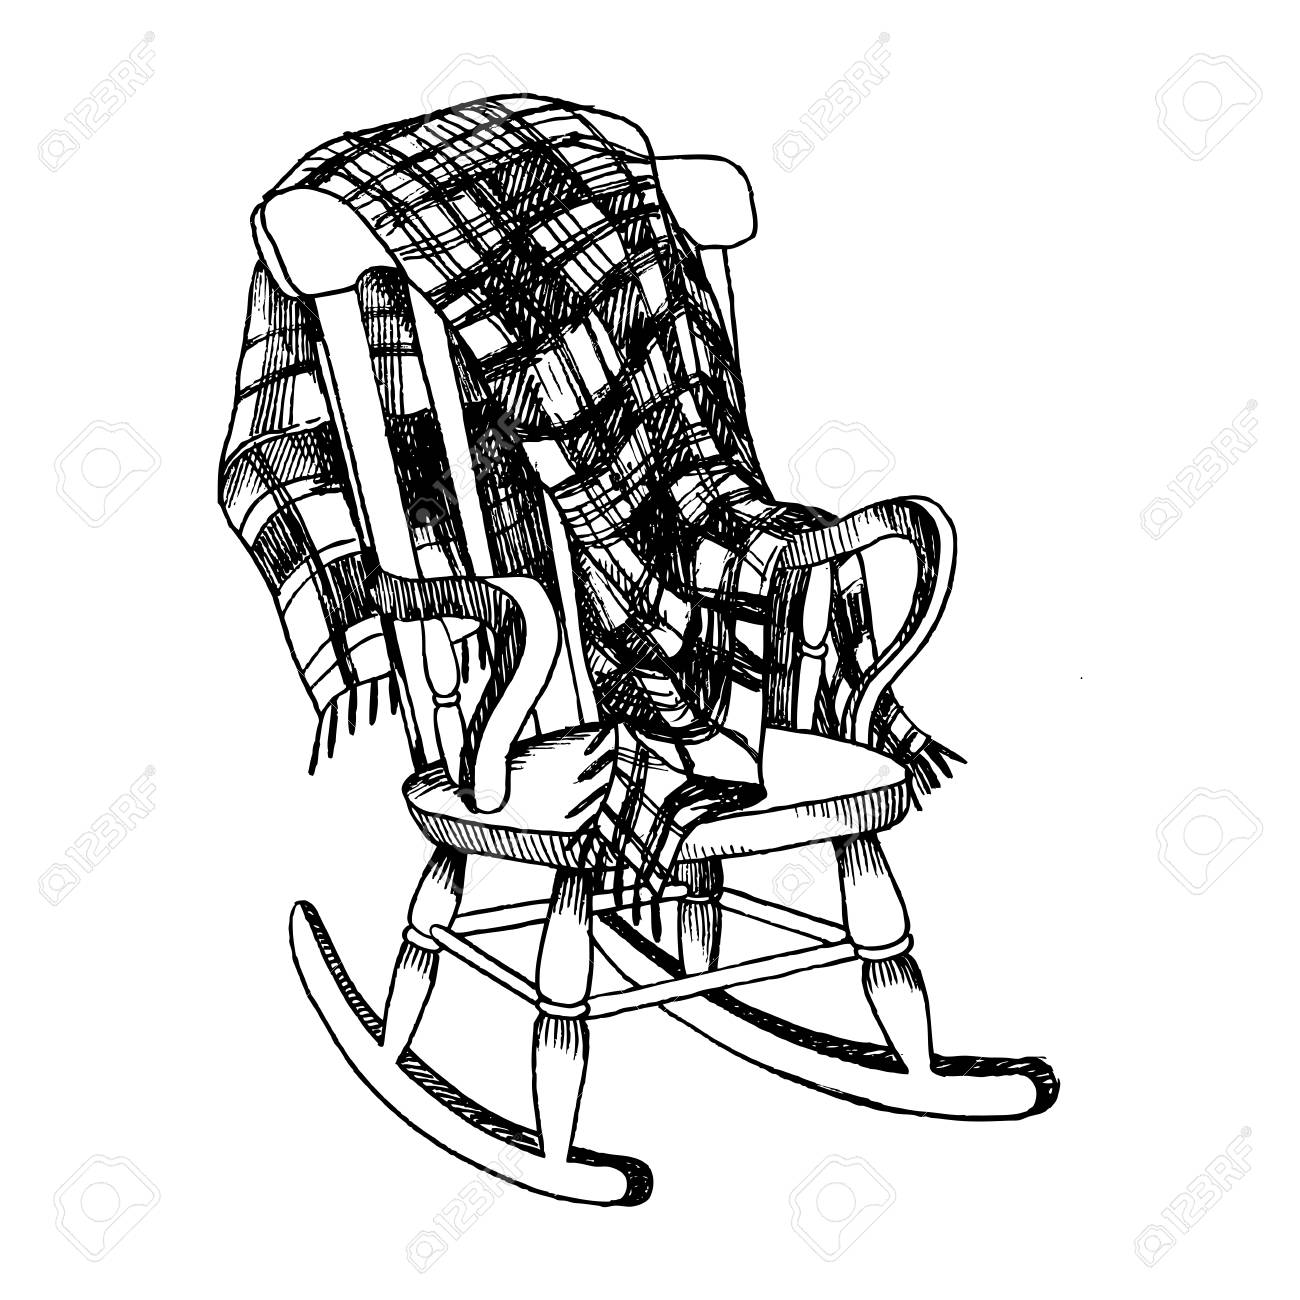 Rocking Chair Drawing at GetDrawings.com | Free for personal use